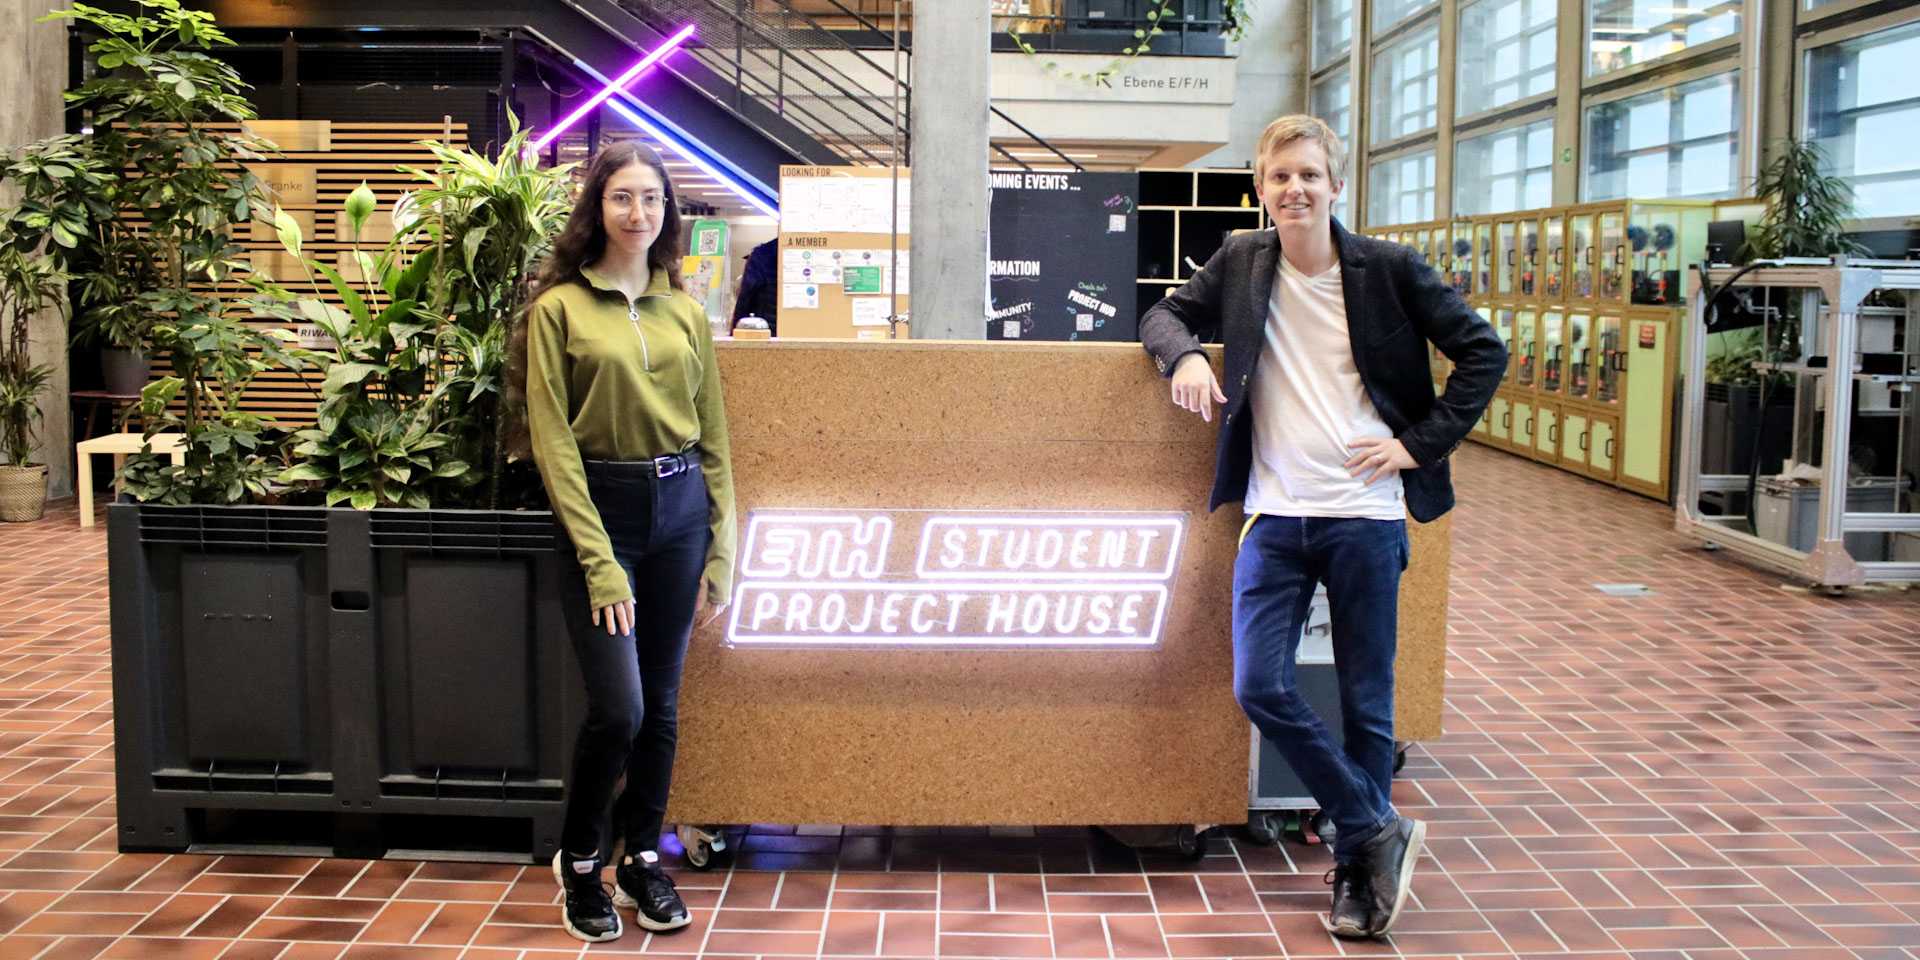 Serena Stefanoni and Rafael von Sury standing in the entrance area of the Student Project House.